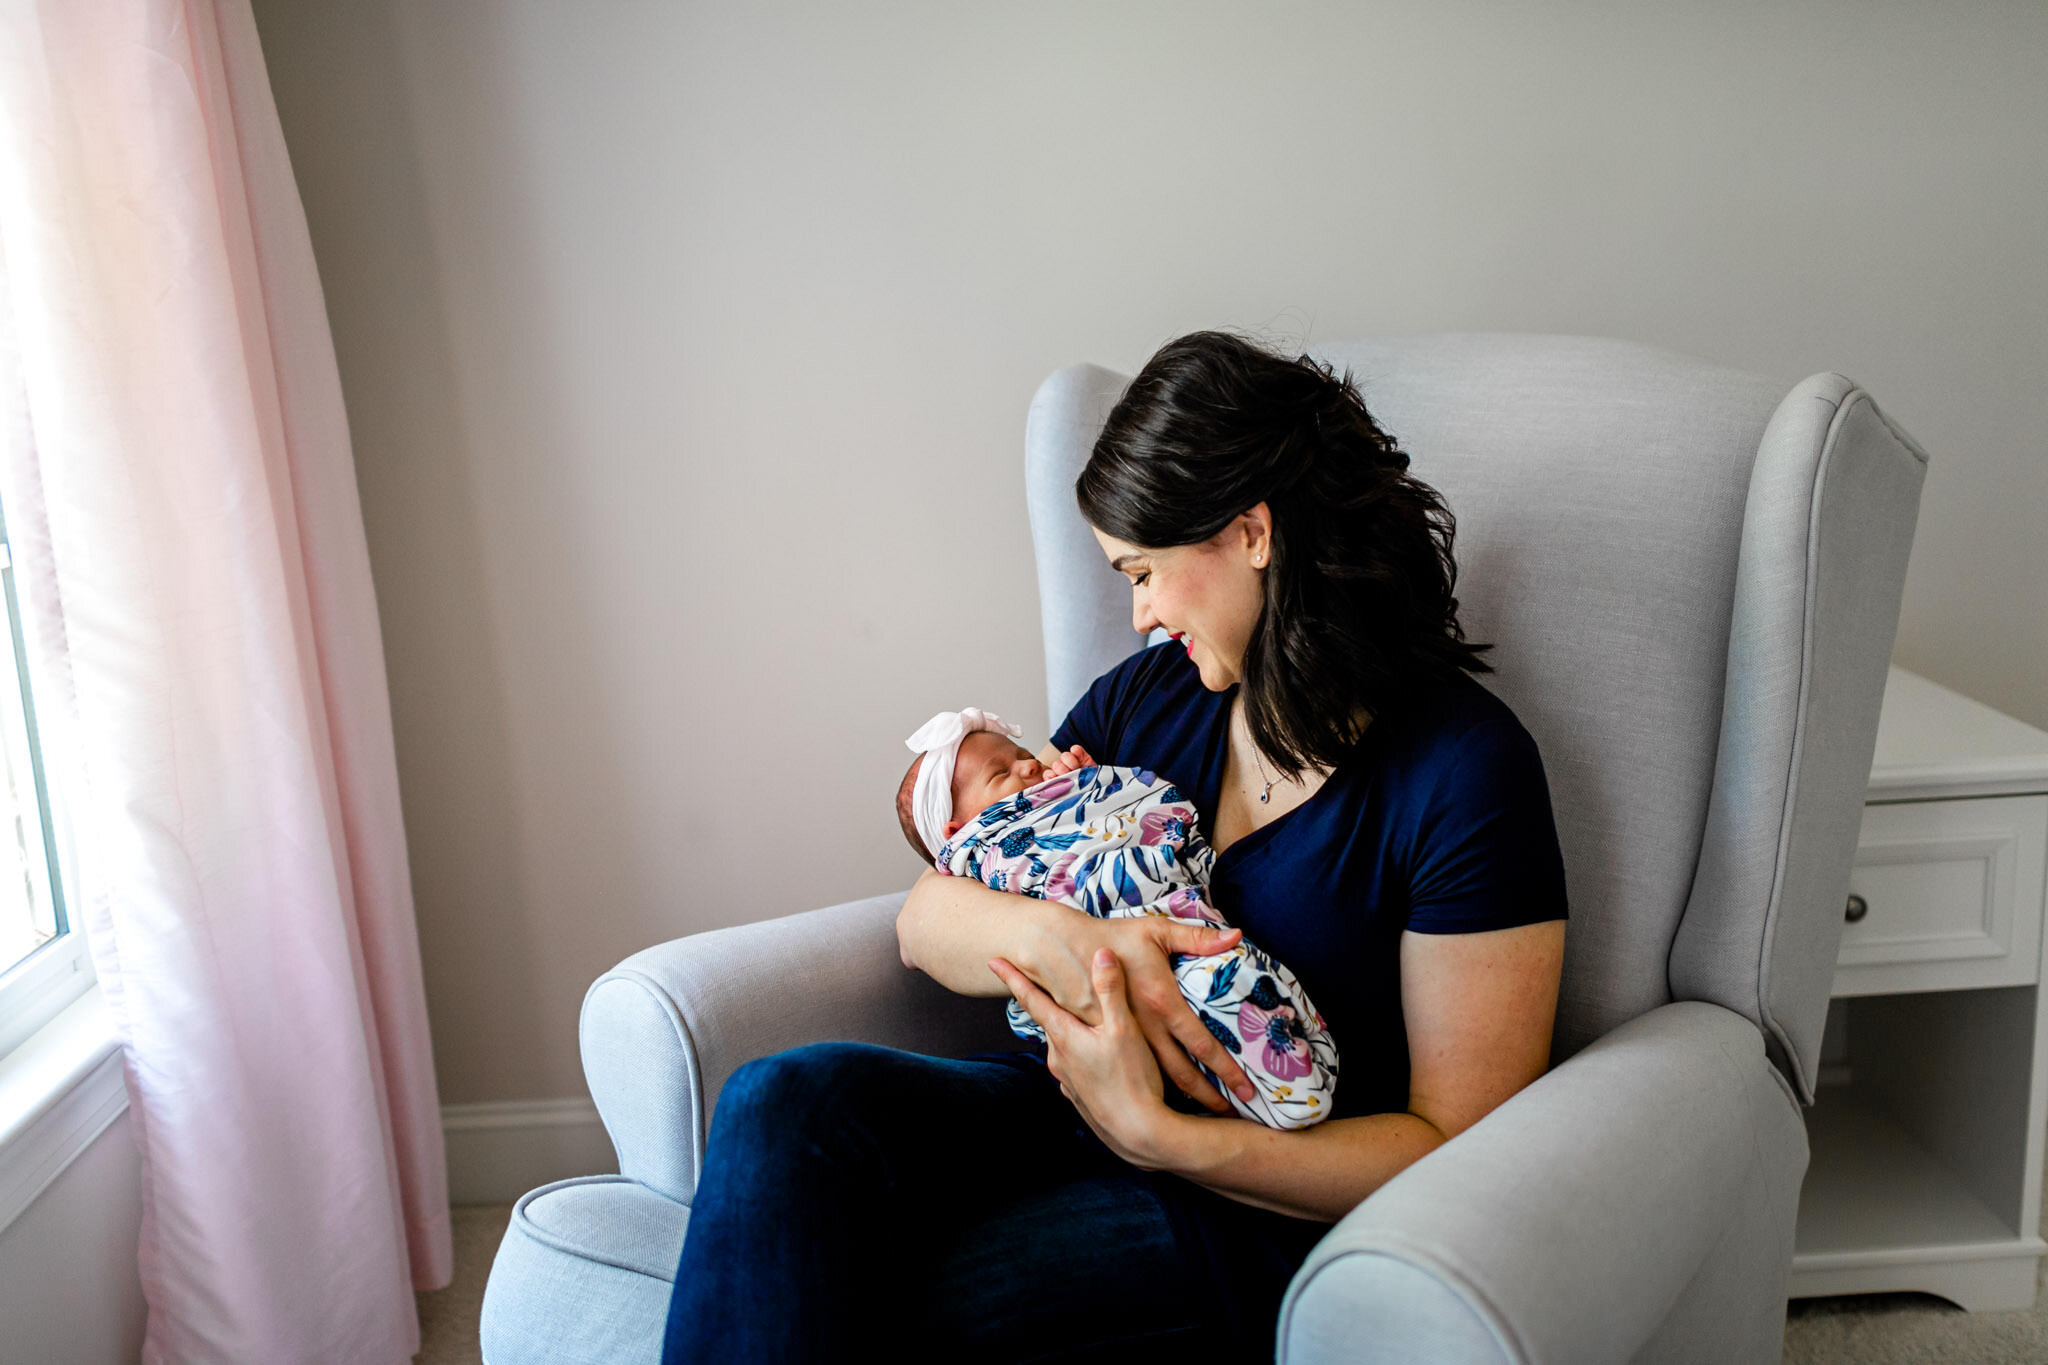 Durham Newborn Photographer | By G. Lin Photography | Lifestyle newborn photos at home | Mother holding baby girl